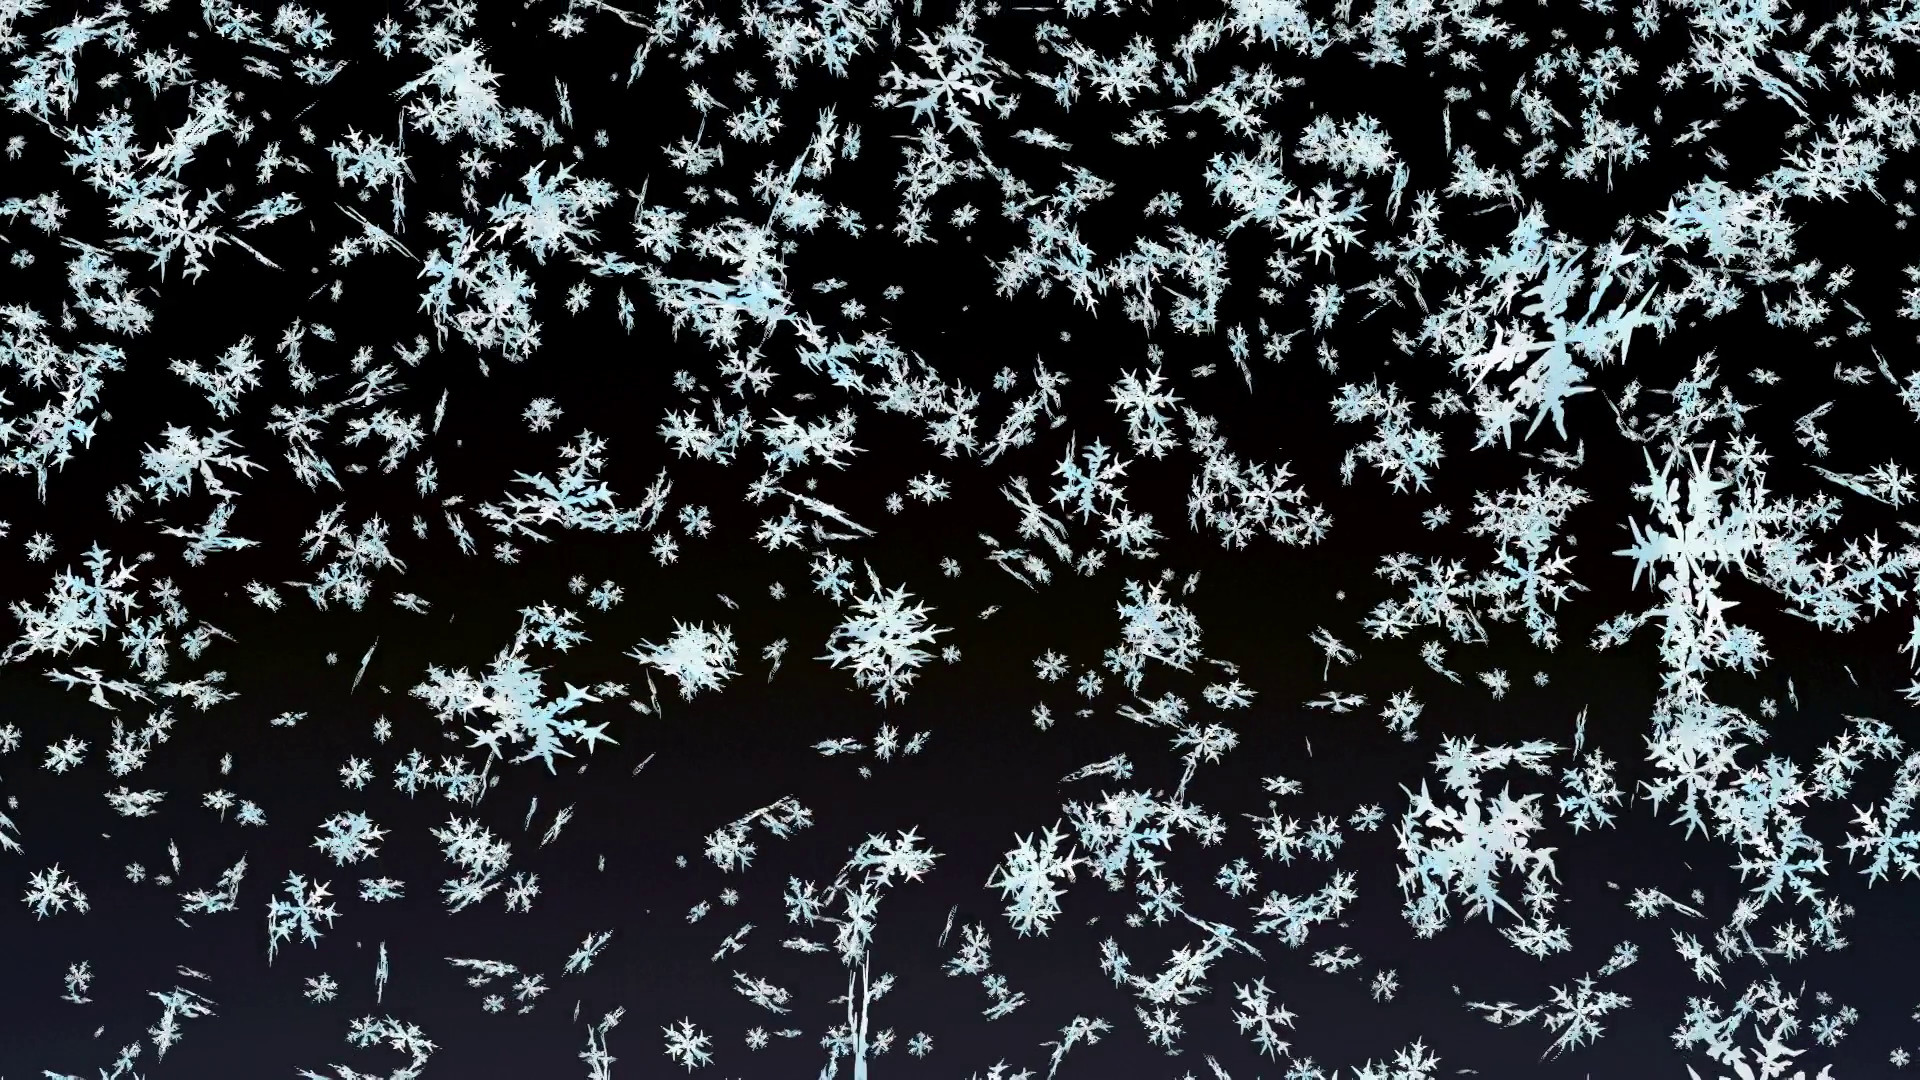 1920x1080 Subscription Library Animated dense falling snow flakes with slightly  frosty light blue texture on each flake 2.